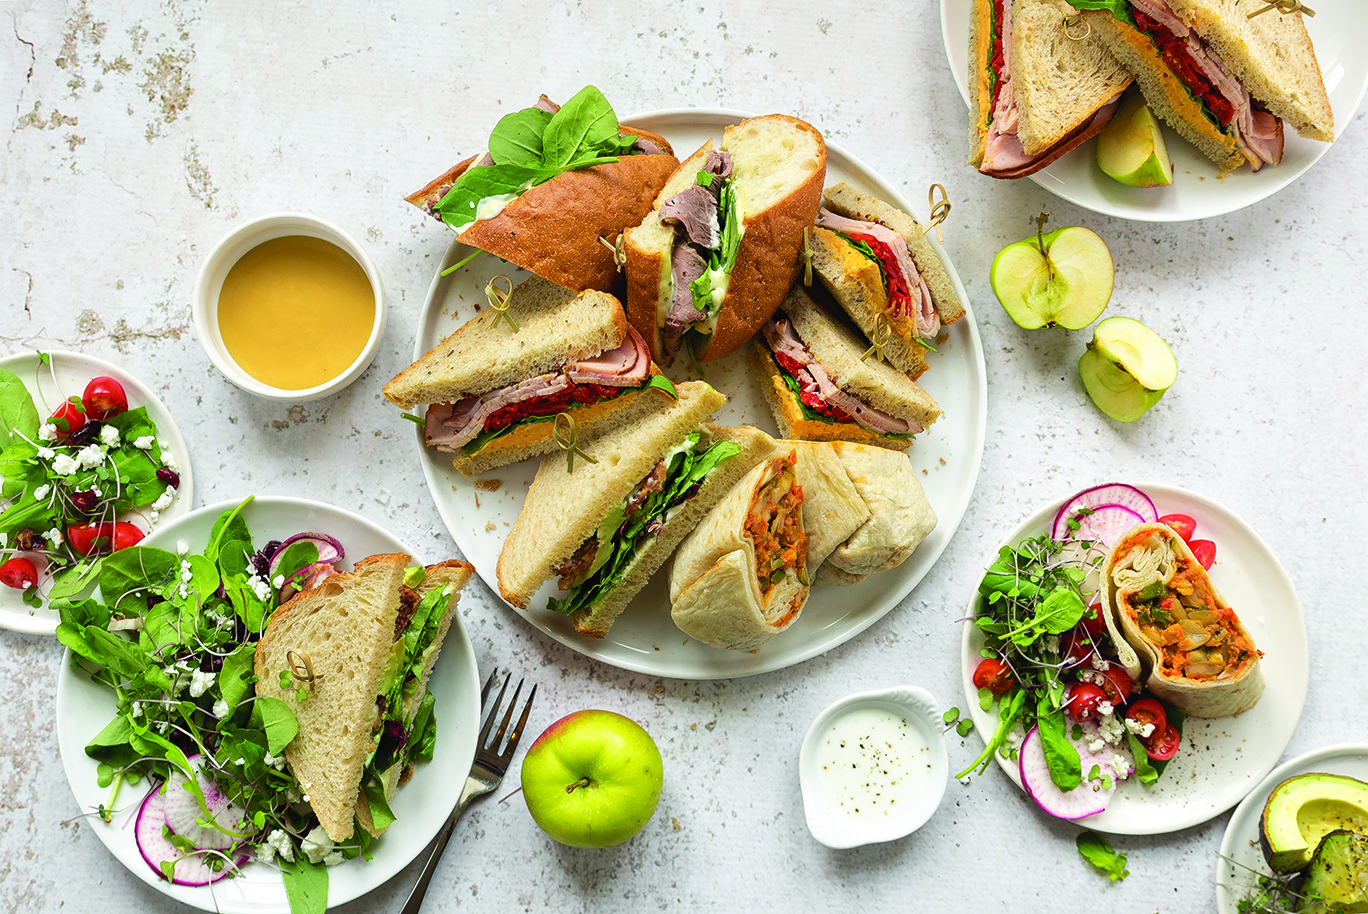 The Wedge's sandwiches, salads, and wraps on a table